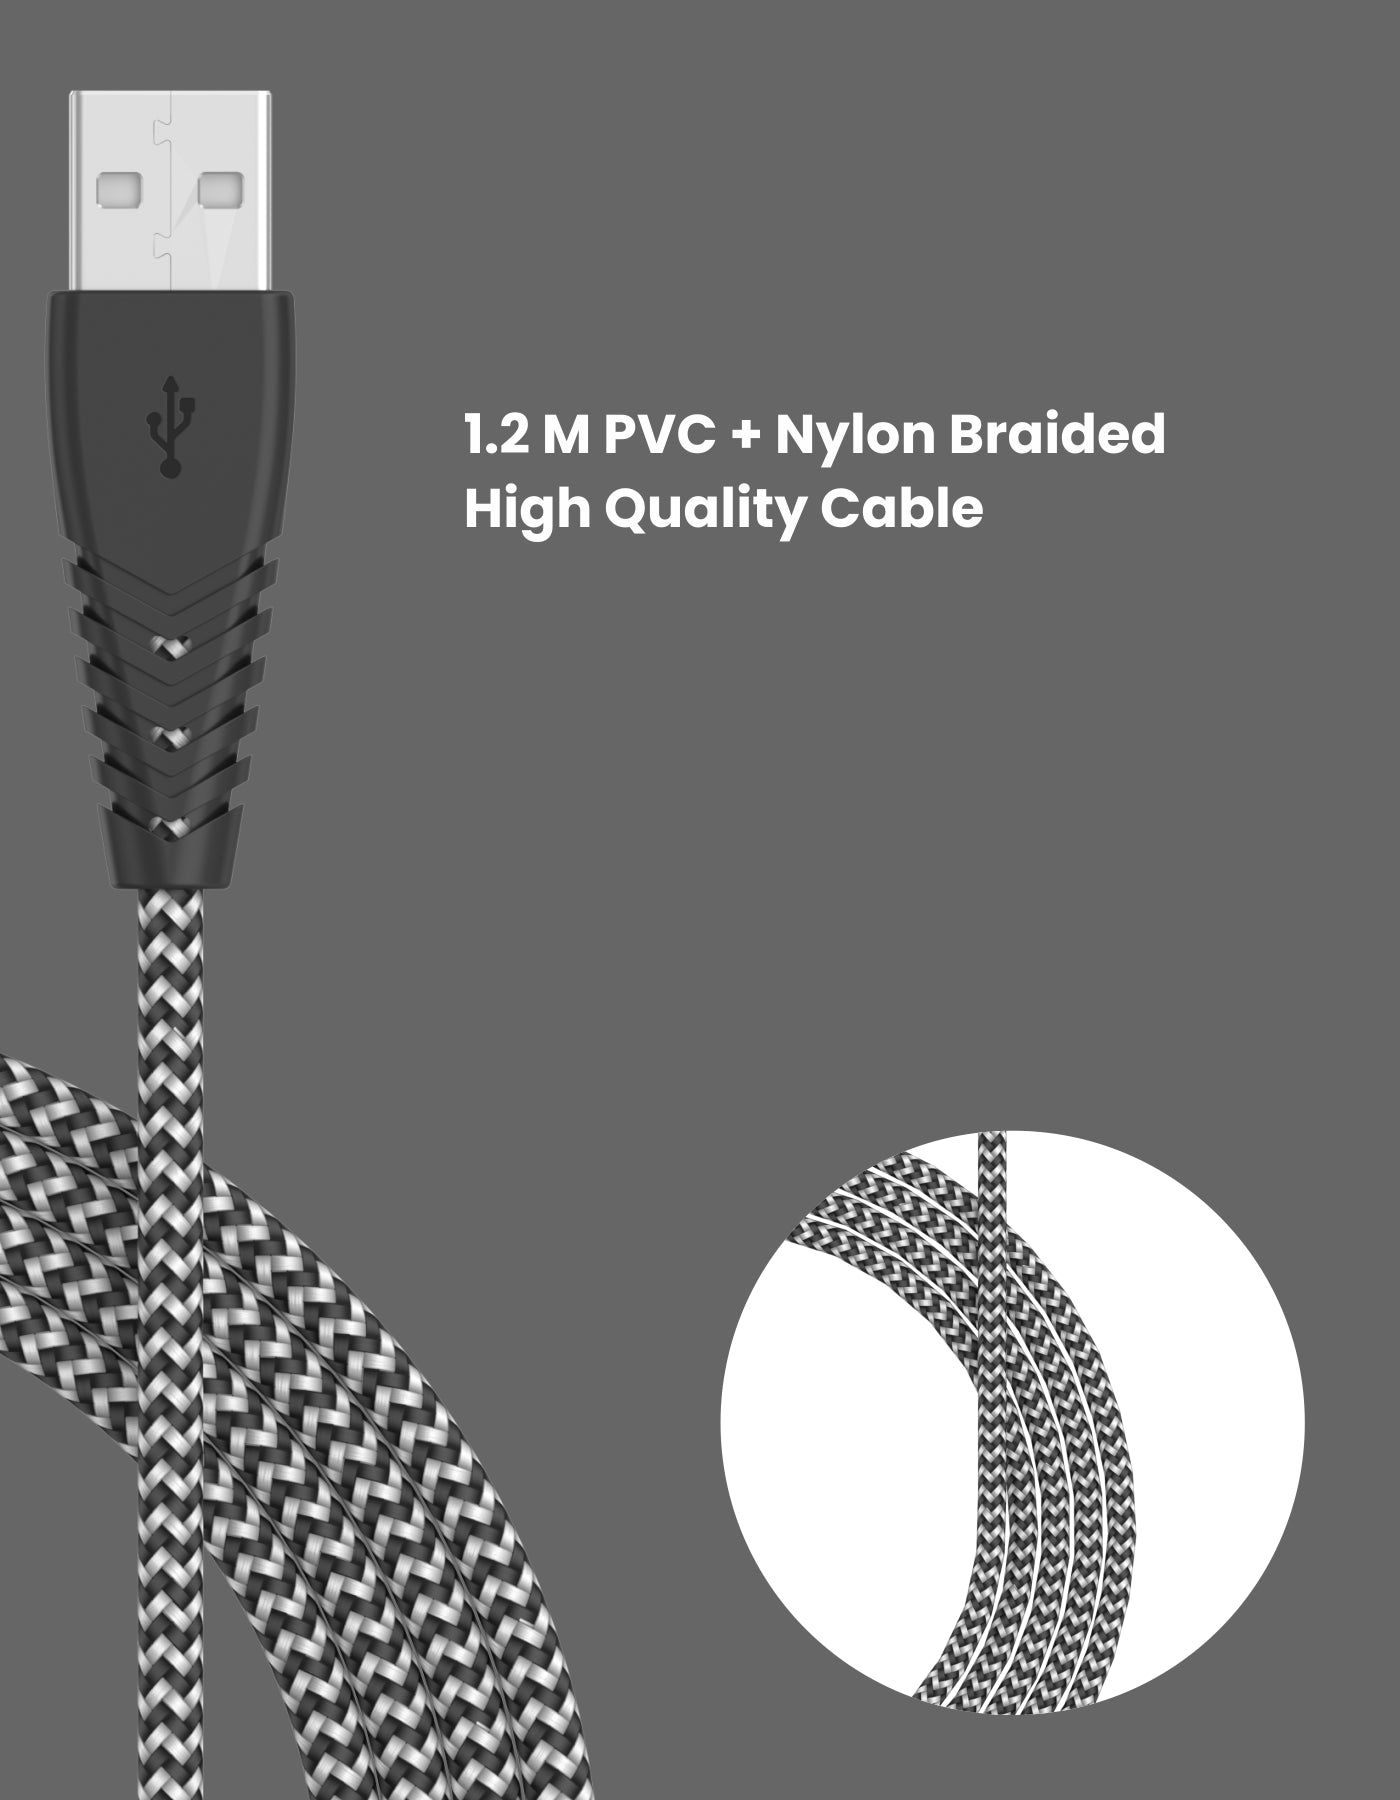 Portronics Konnect Spydr 31 3-in-one cable with micro USB, iOS, & Type C 1.2 meter long nylon cable 